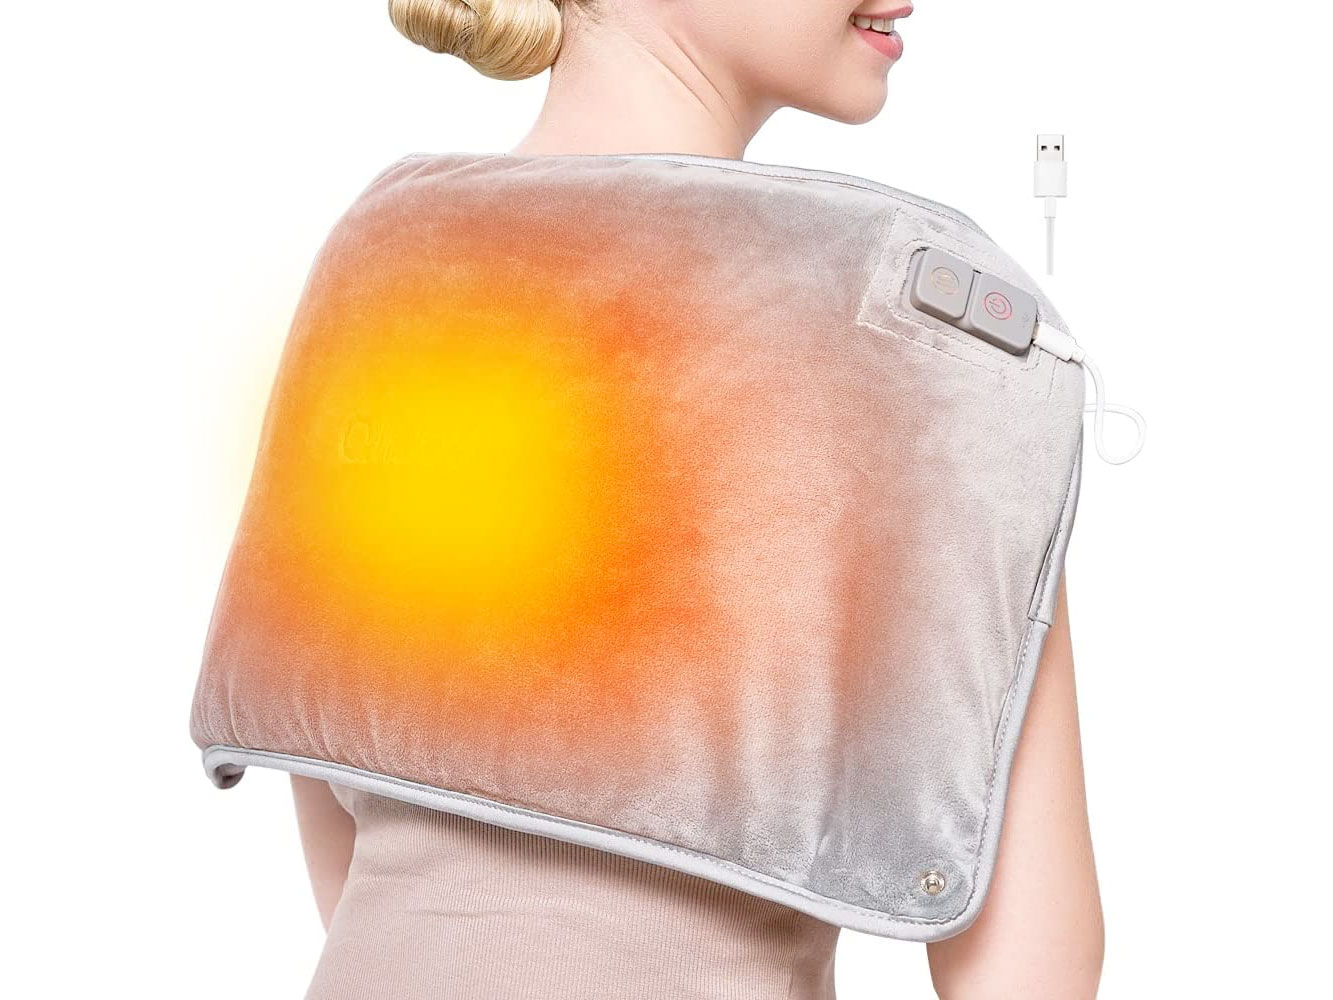 Amazon：Heating Pad for Back Pain and Cramps Relief只賣$16.99